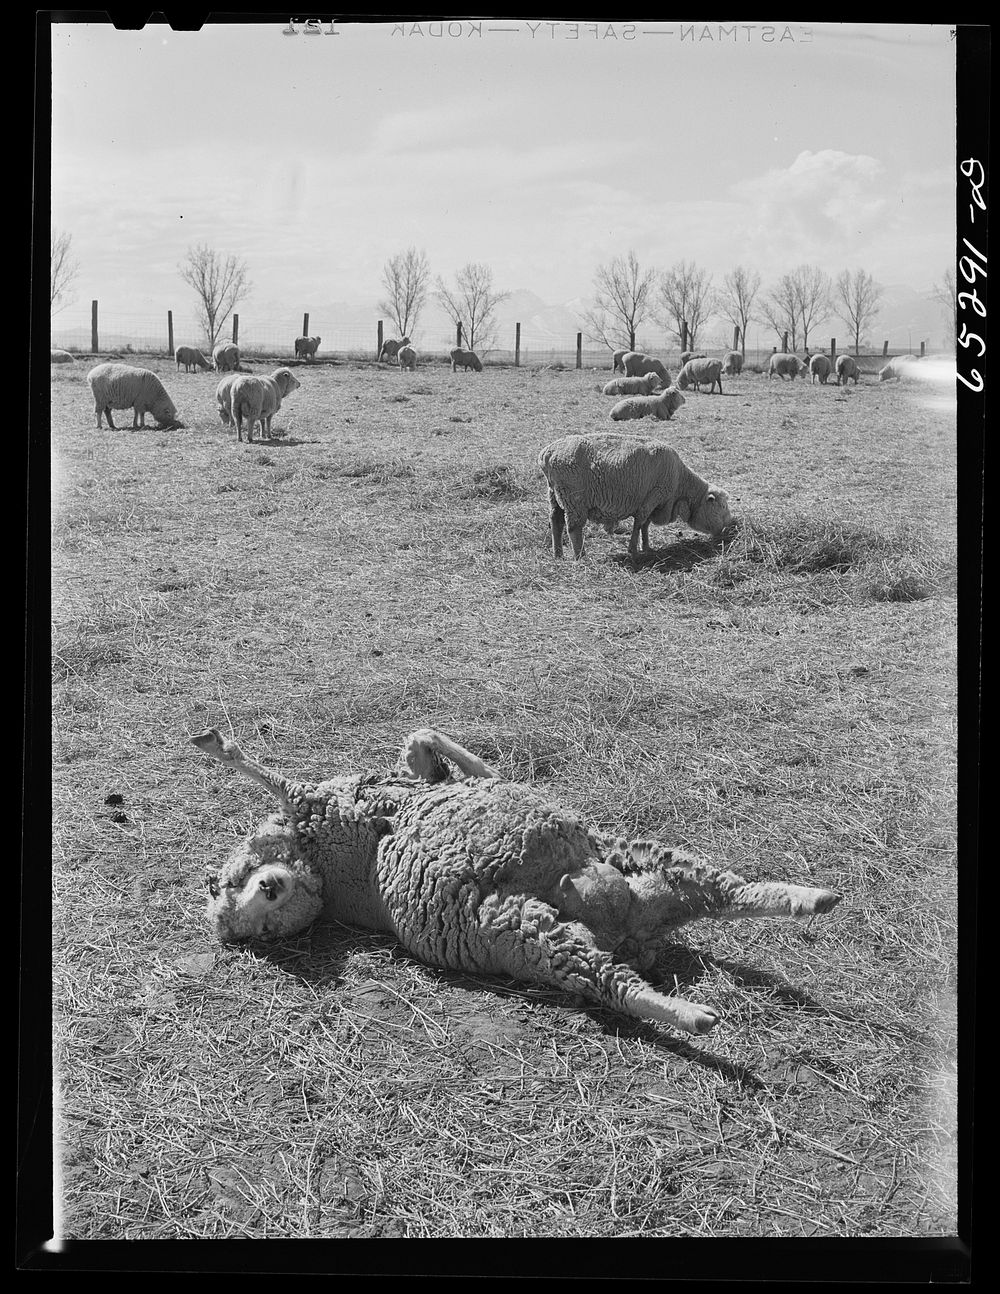 Ravalli County, Montana. Ewe giving birth to lamb. Sourced from the Library of Congress.